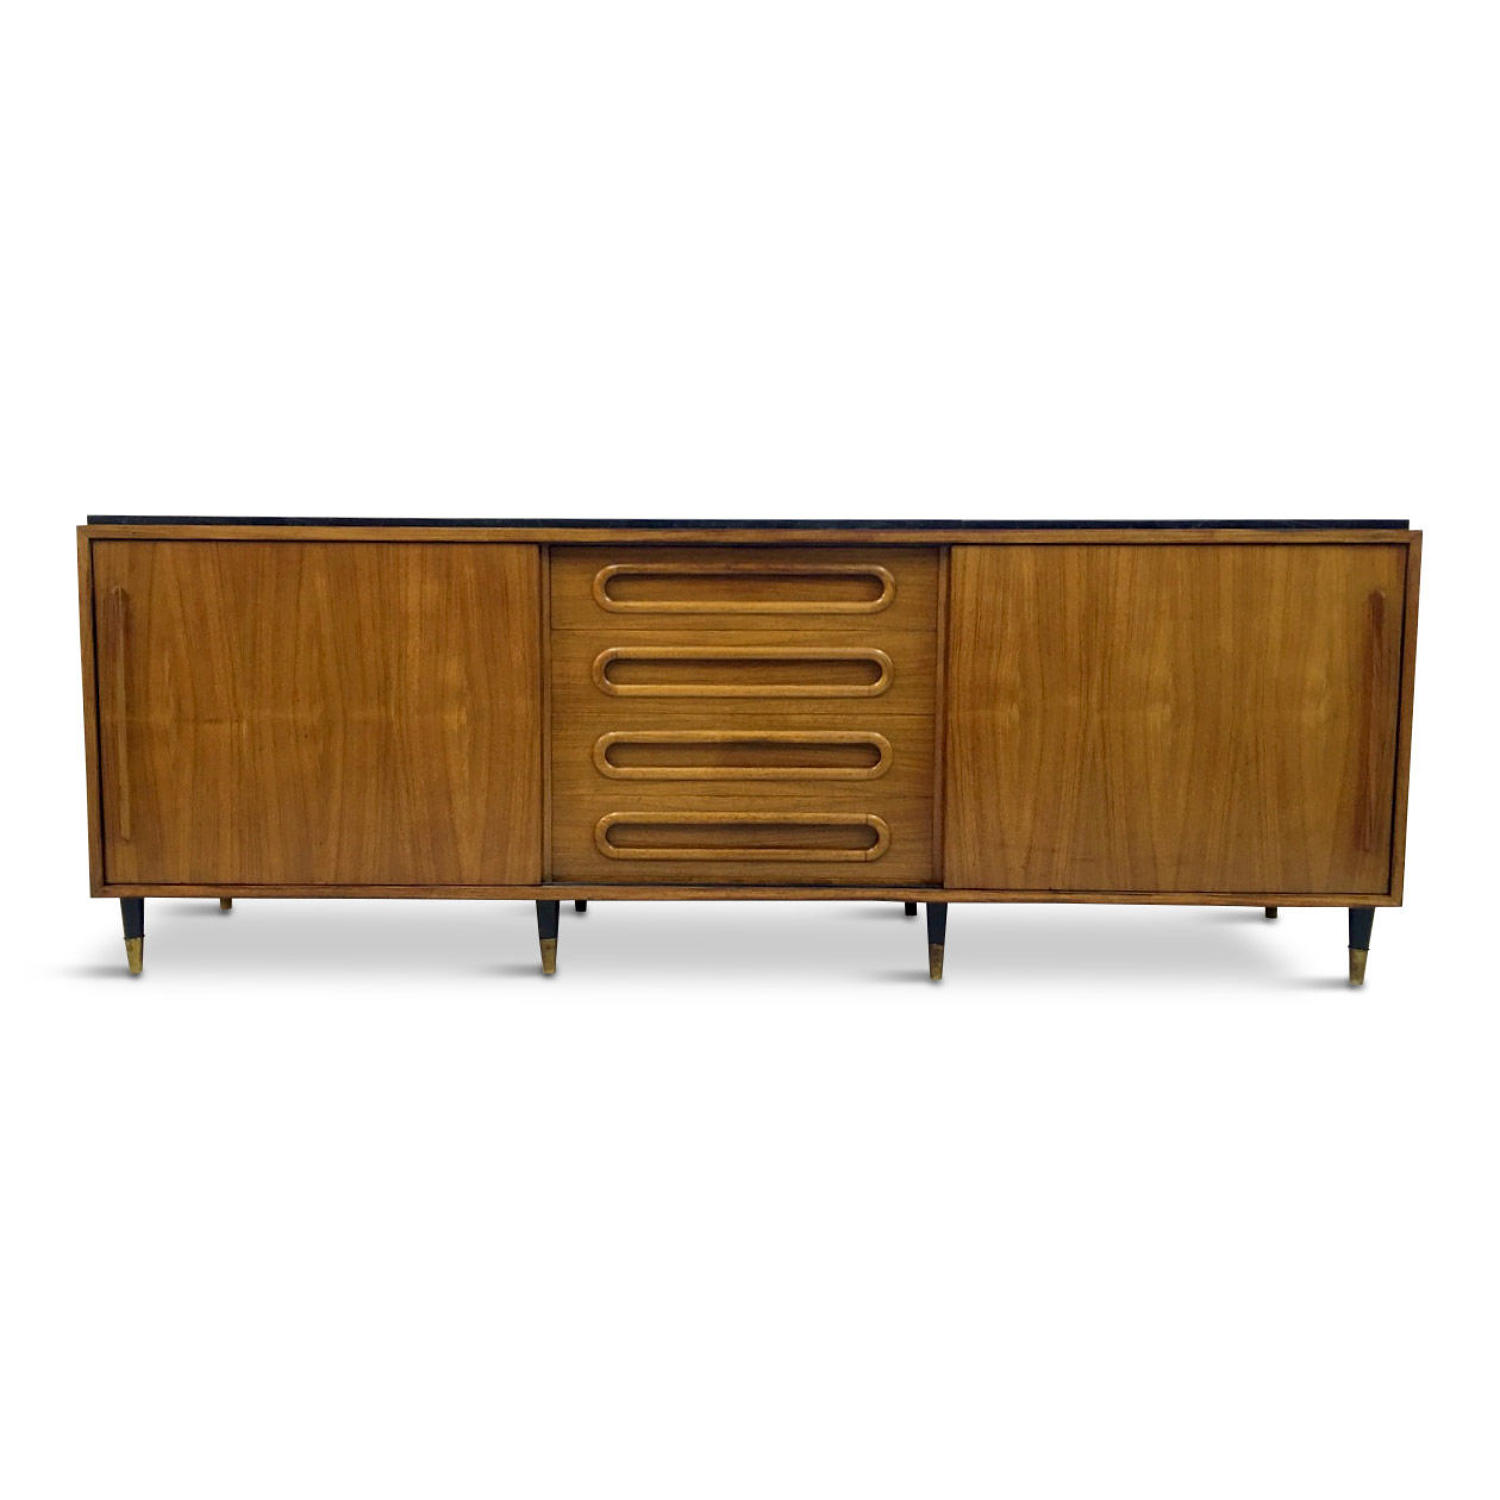 1960s Italian rosewood and marble sideboard